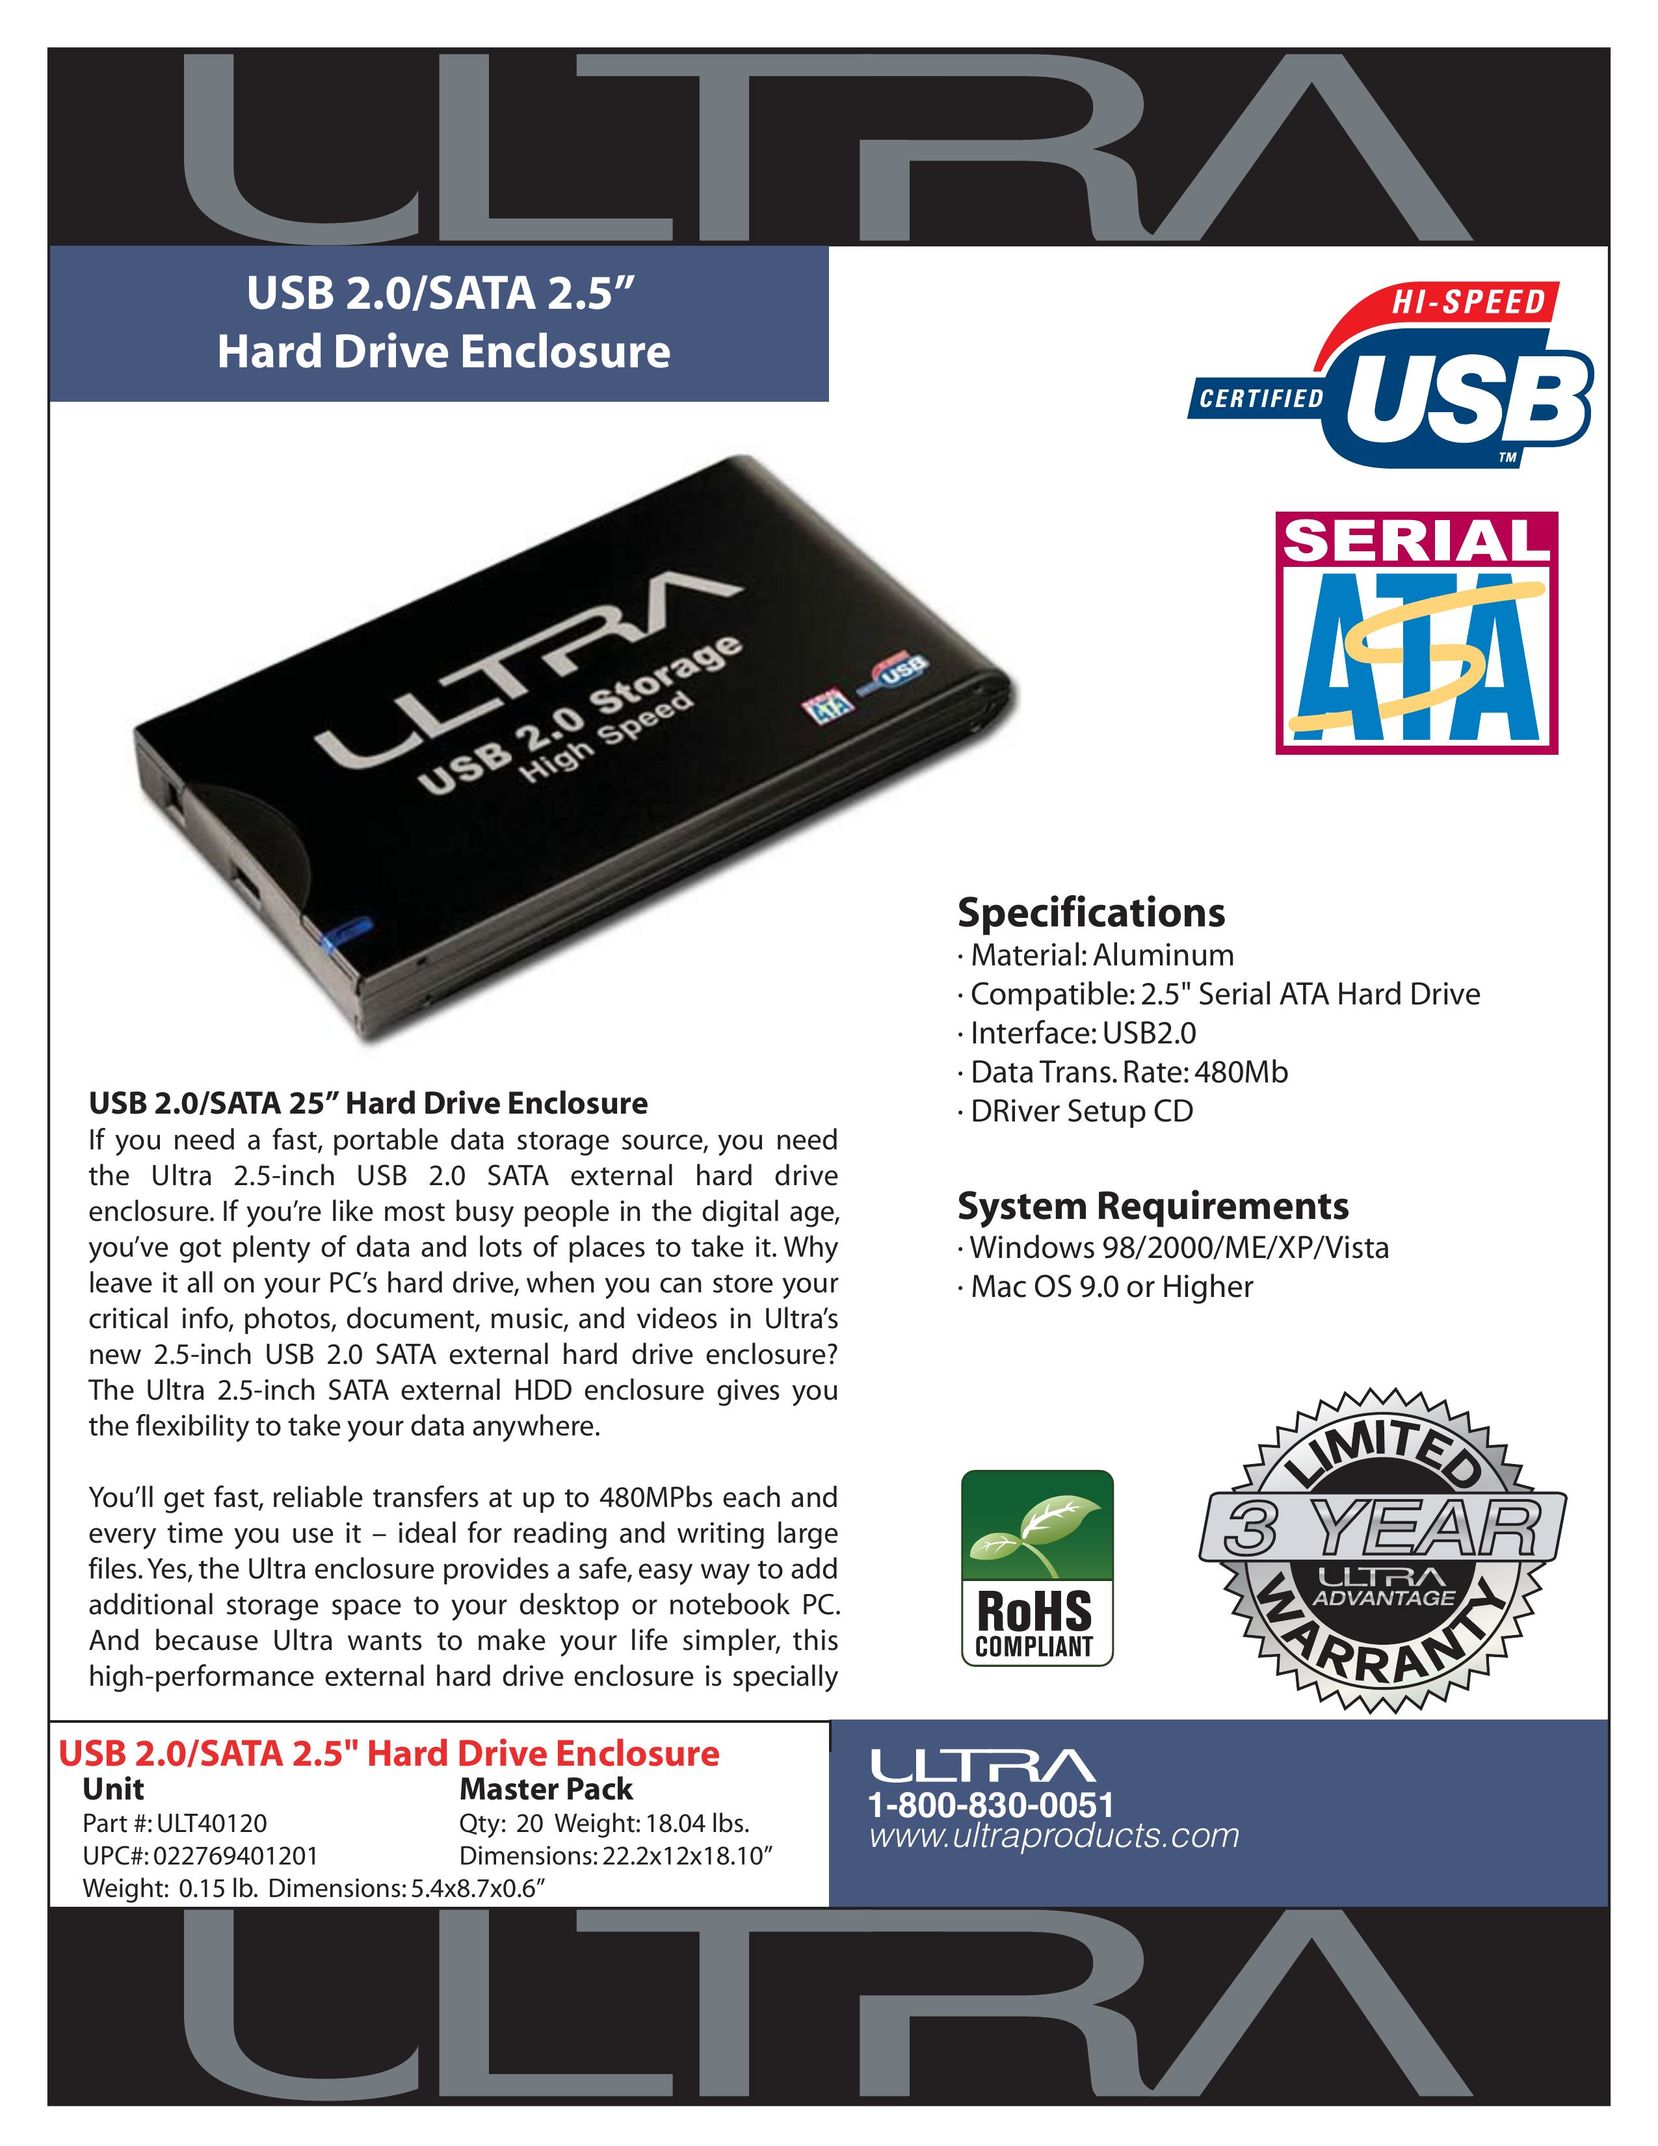 Ultra Products ULT40120 Network Card User Manual